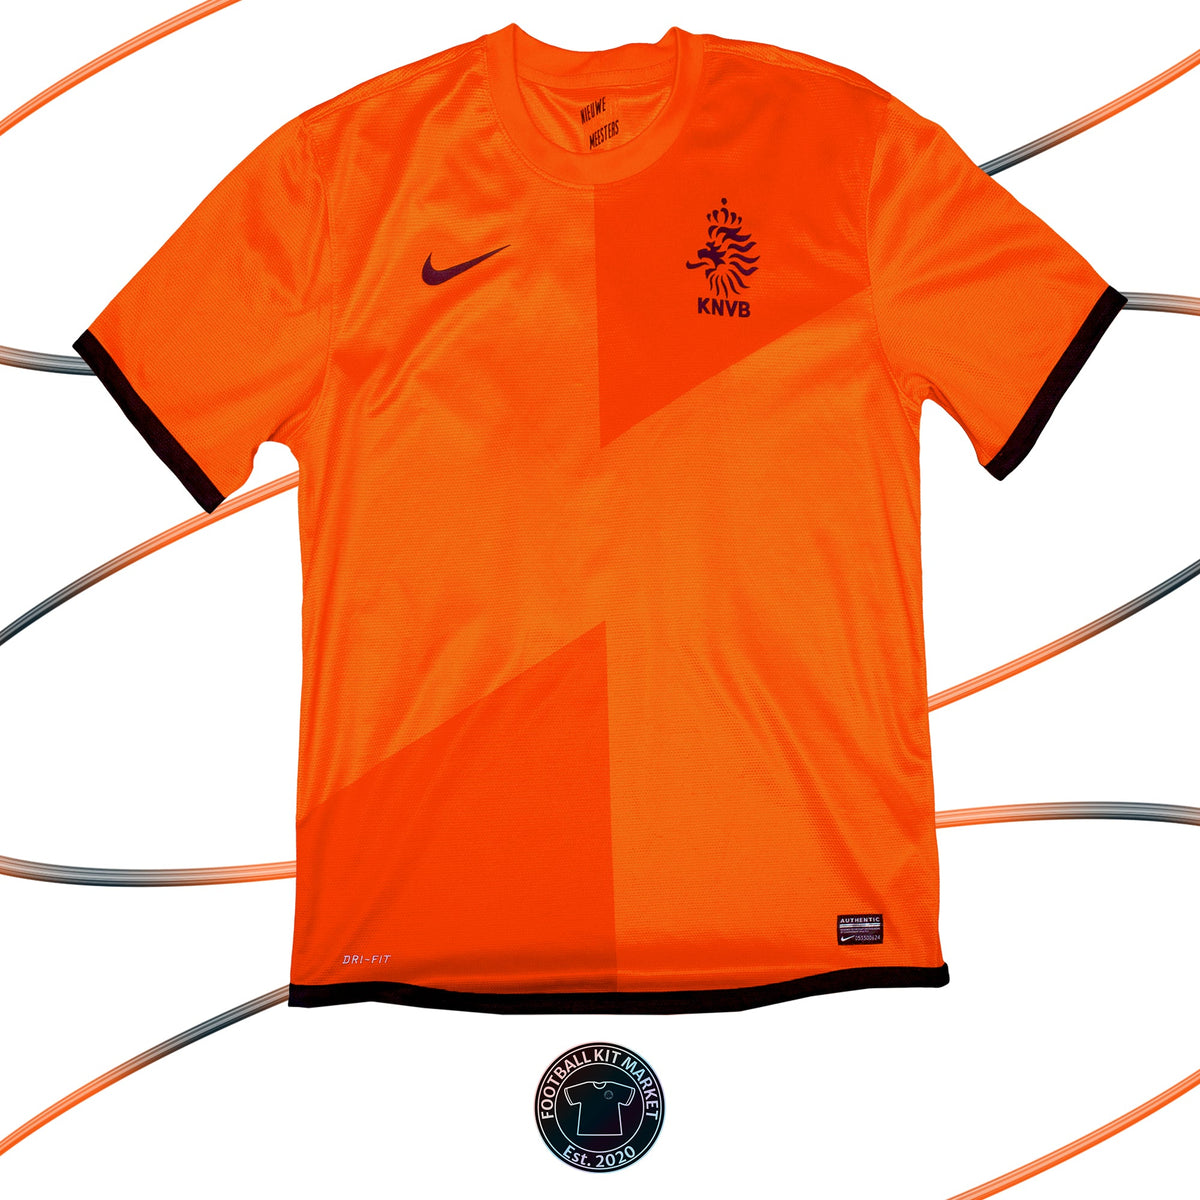 Genuine NETHERLANDS Home V.PERSIE (2012-2014) - NIKE (L) - Product Image from Football Kit Market